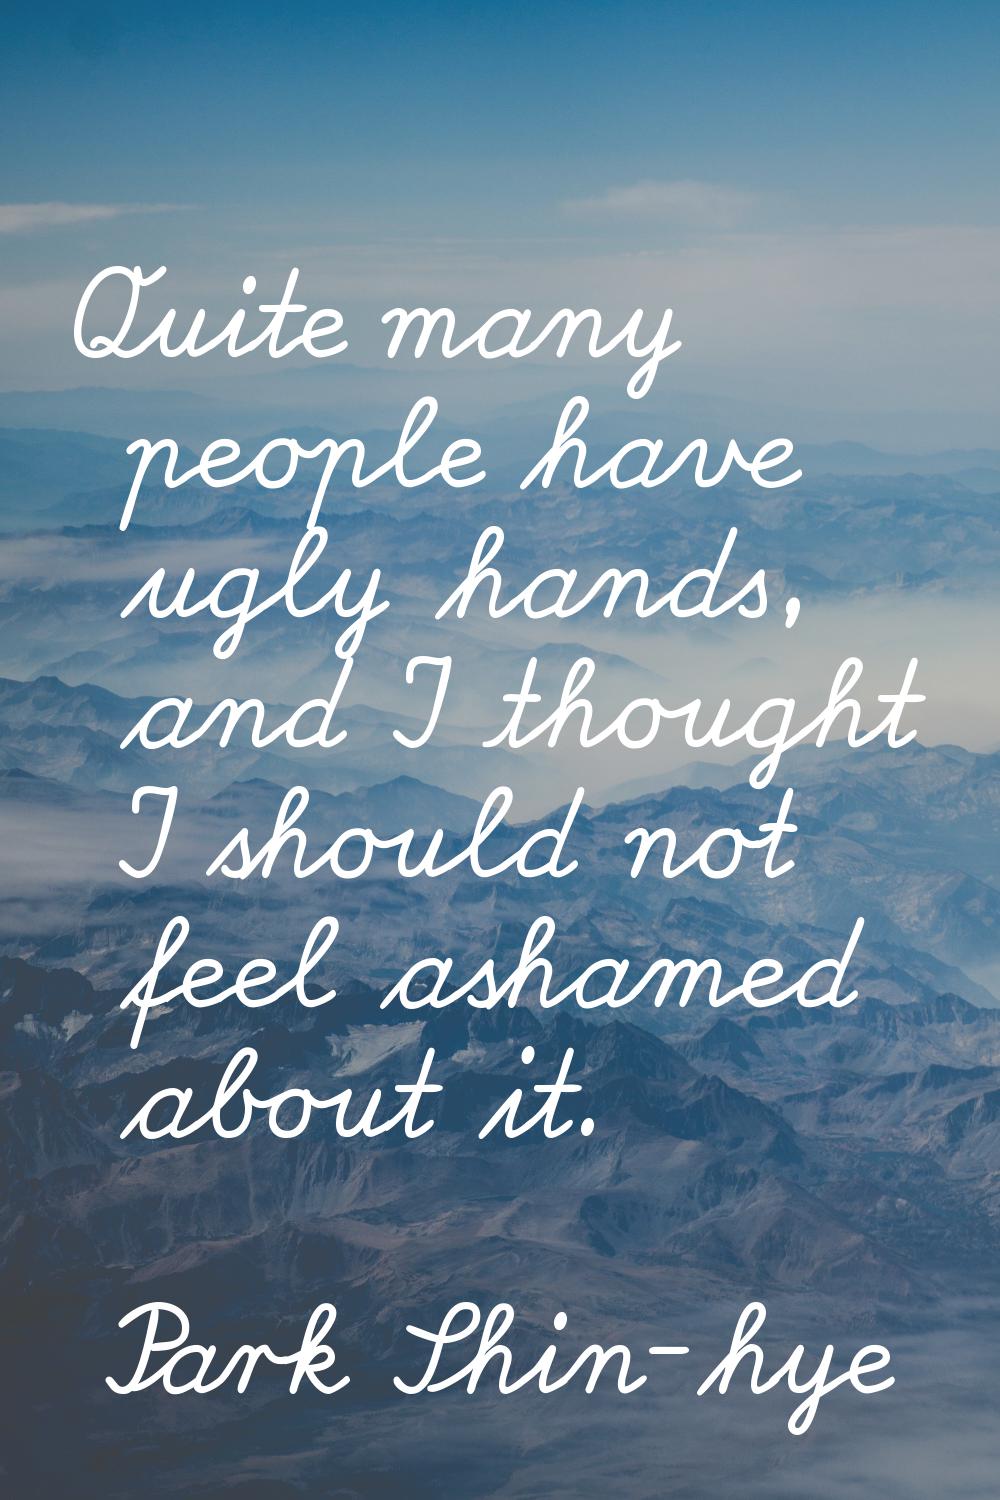 Quite many people have ugly hands, and I thought I should not feel ashamed about it.